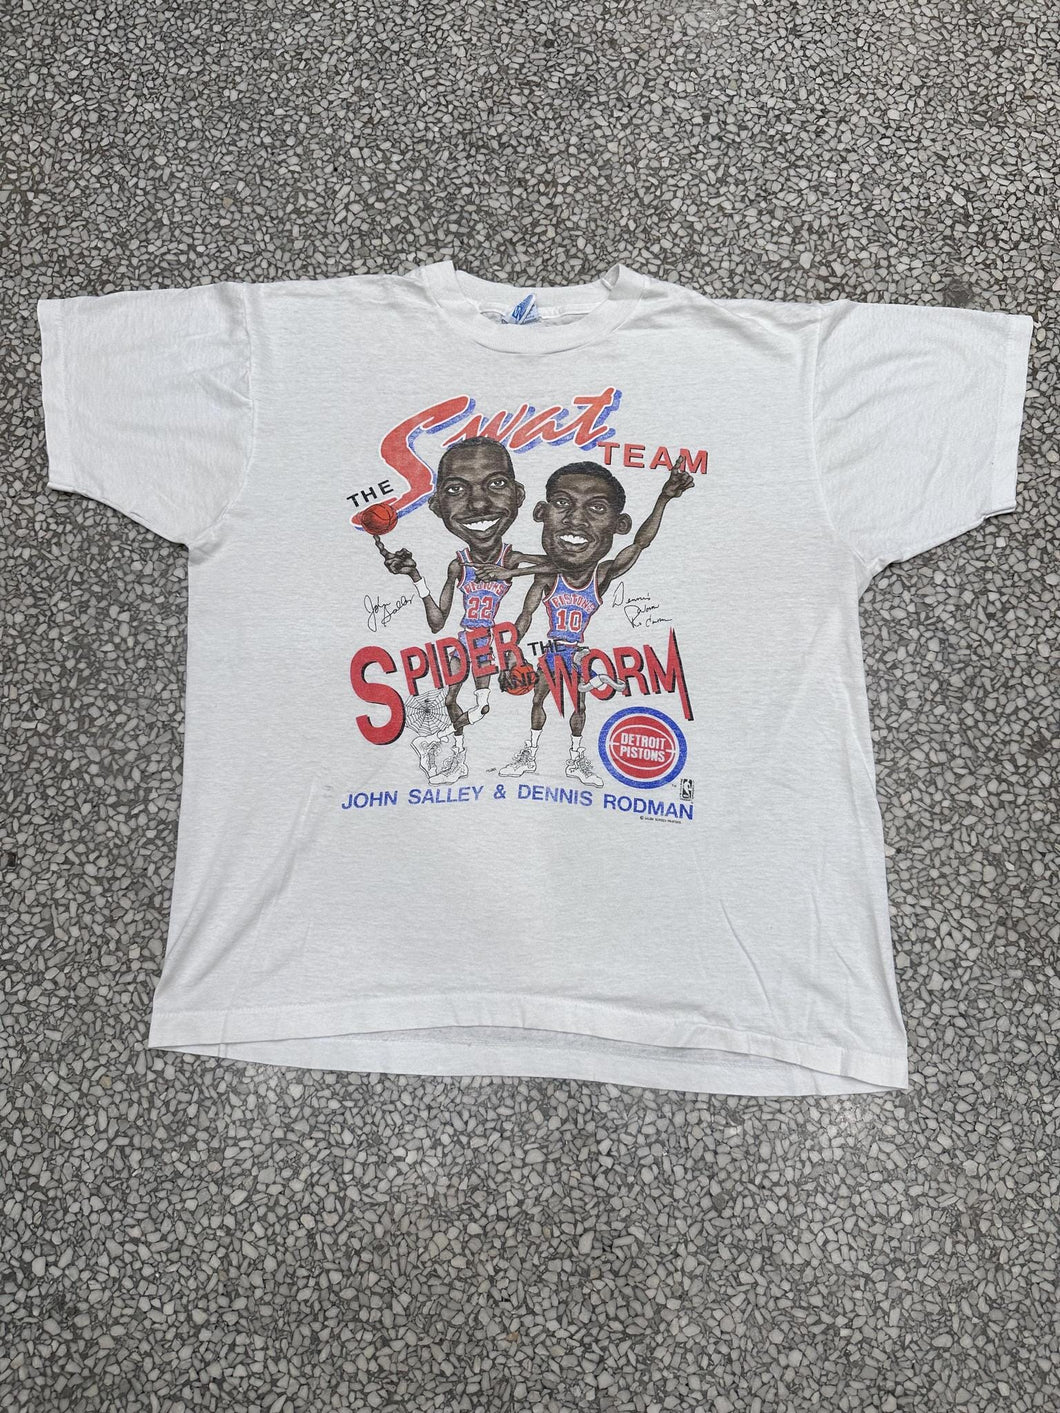 Detroit Pistons Vintage 1989 The Swat Team Spider And The Worm Paper Thin Faded White ABC Vintage 